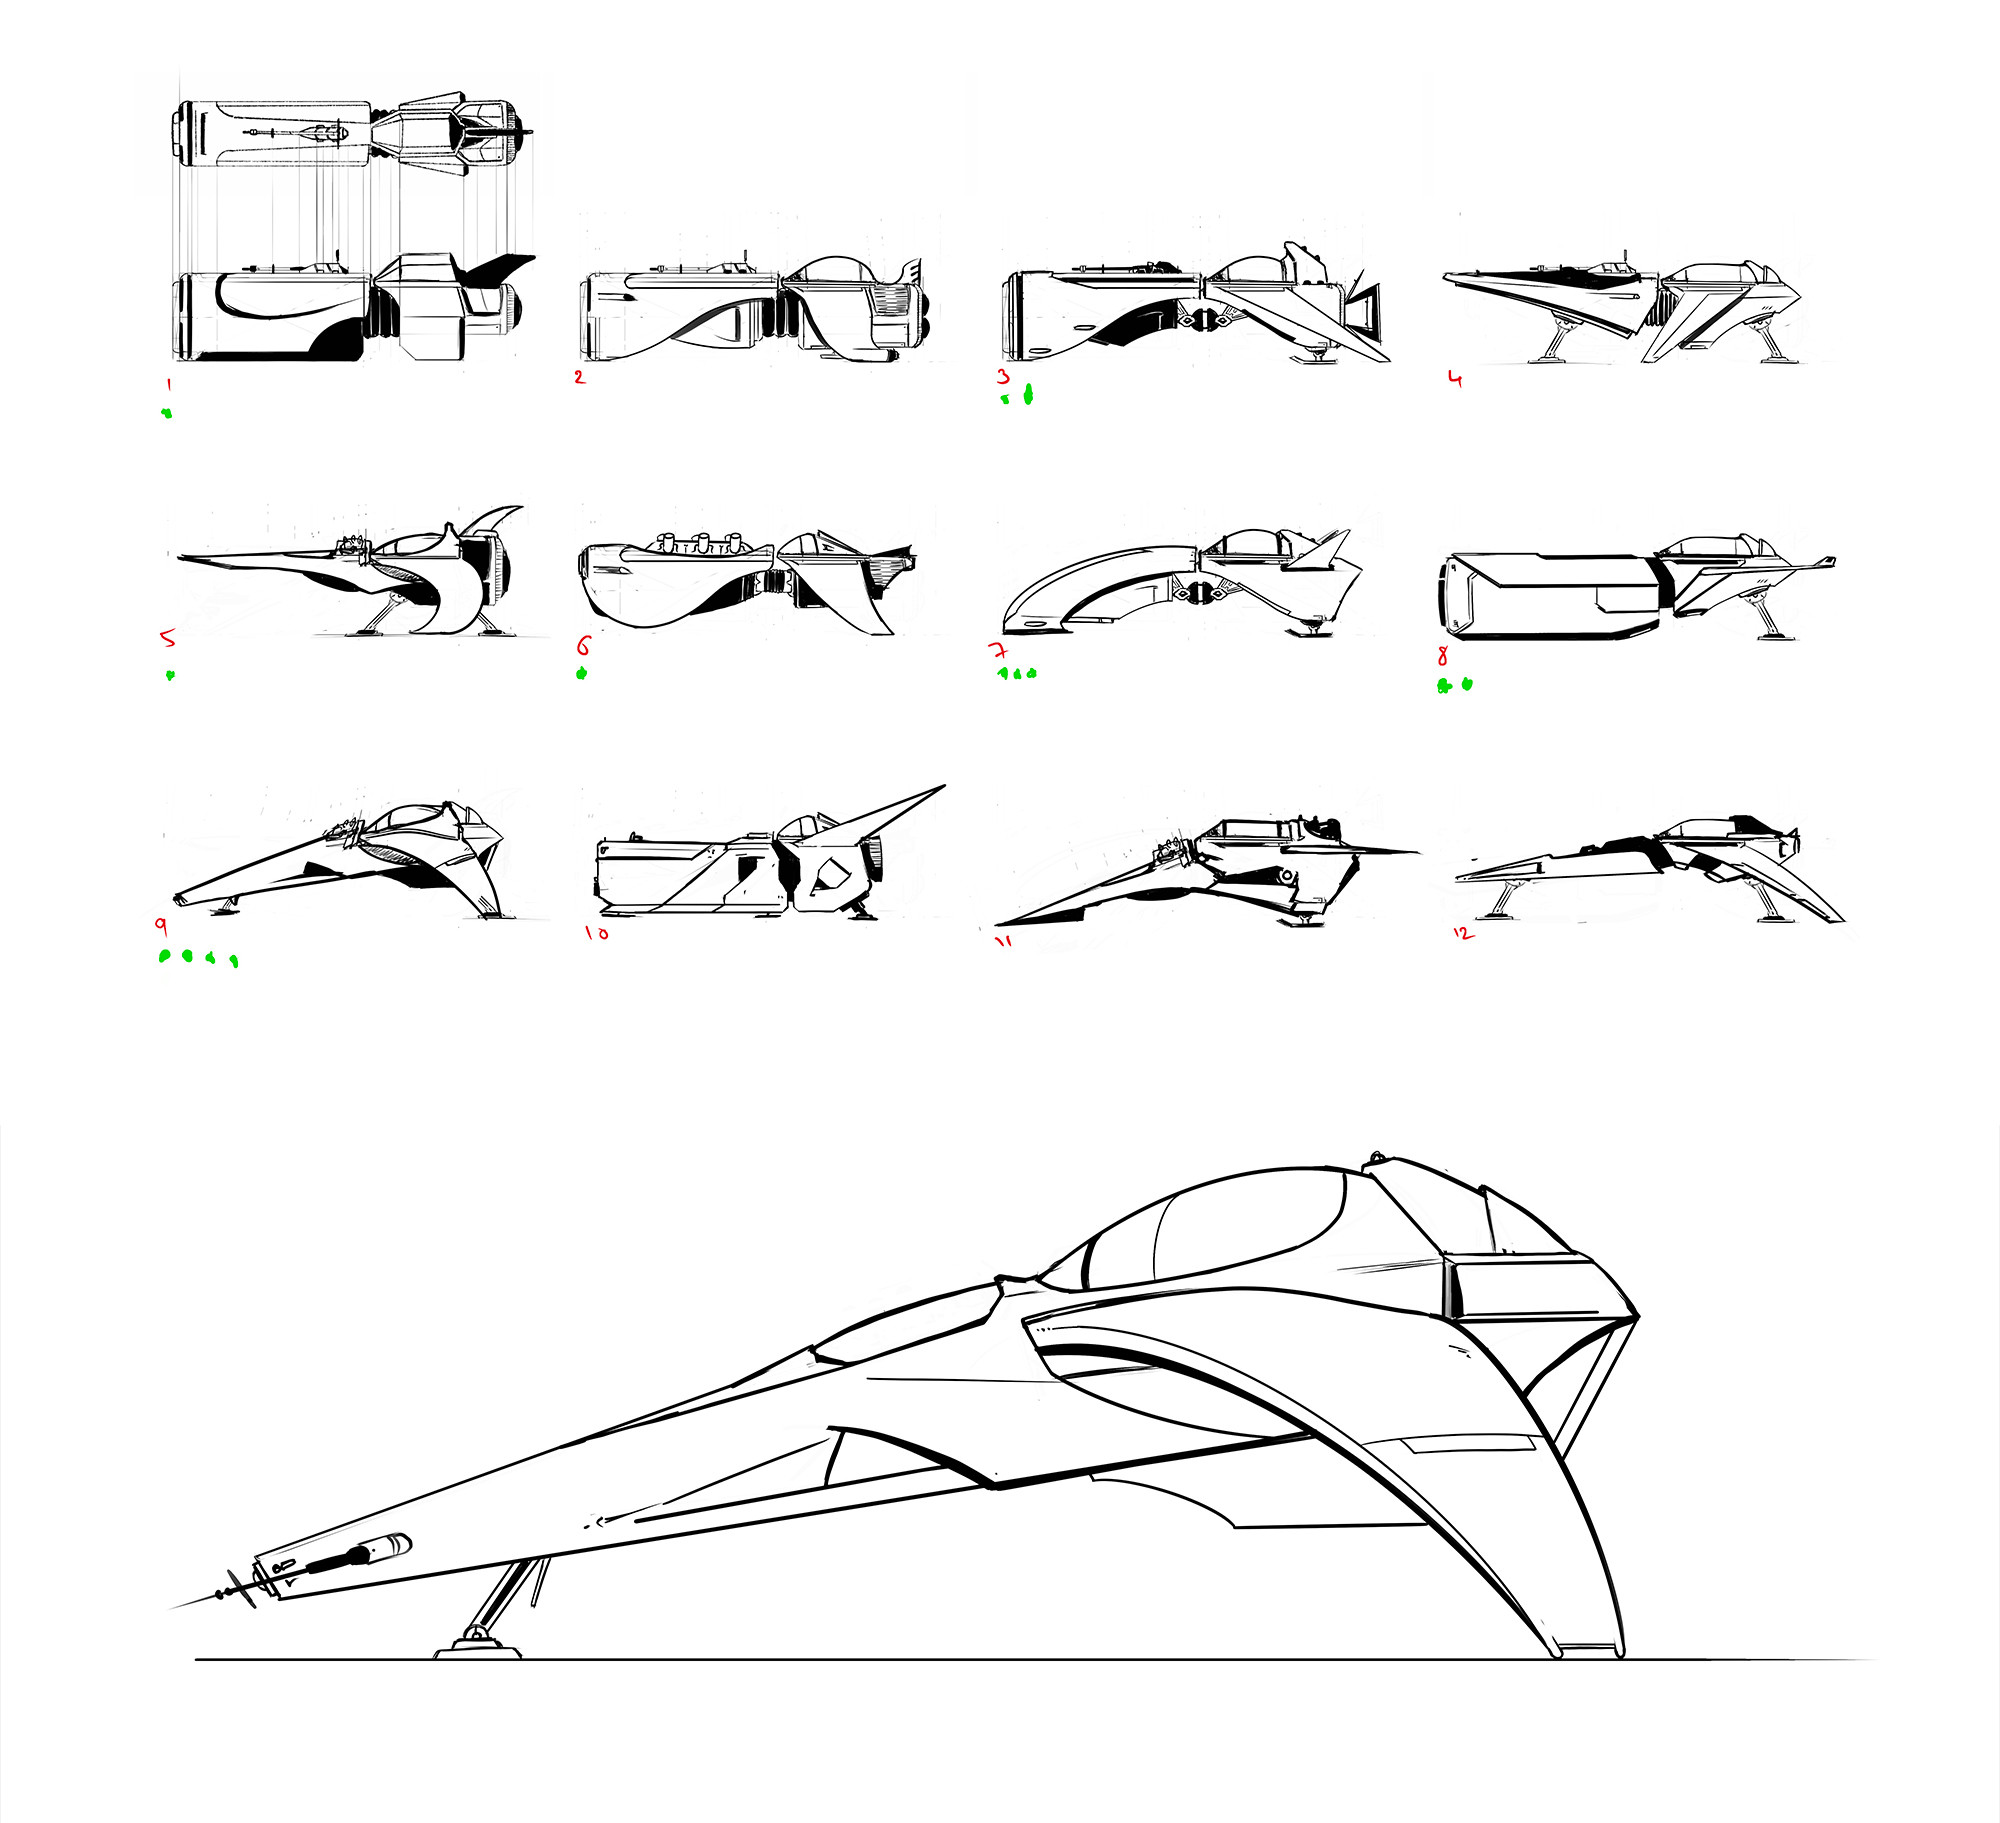 Spaceship sketches research